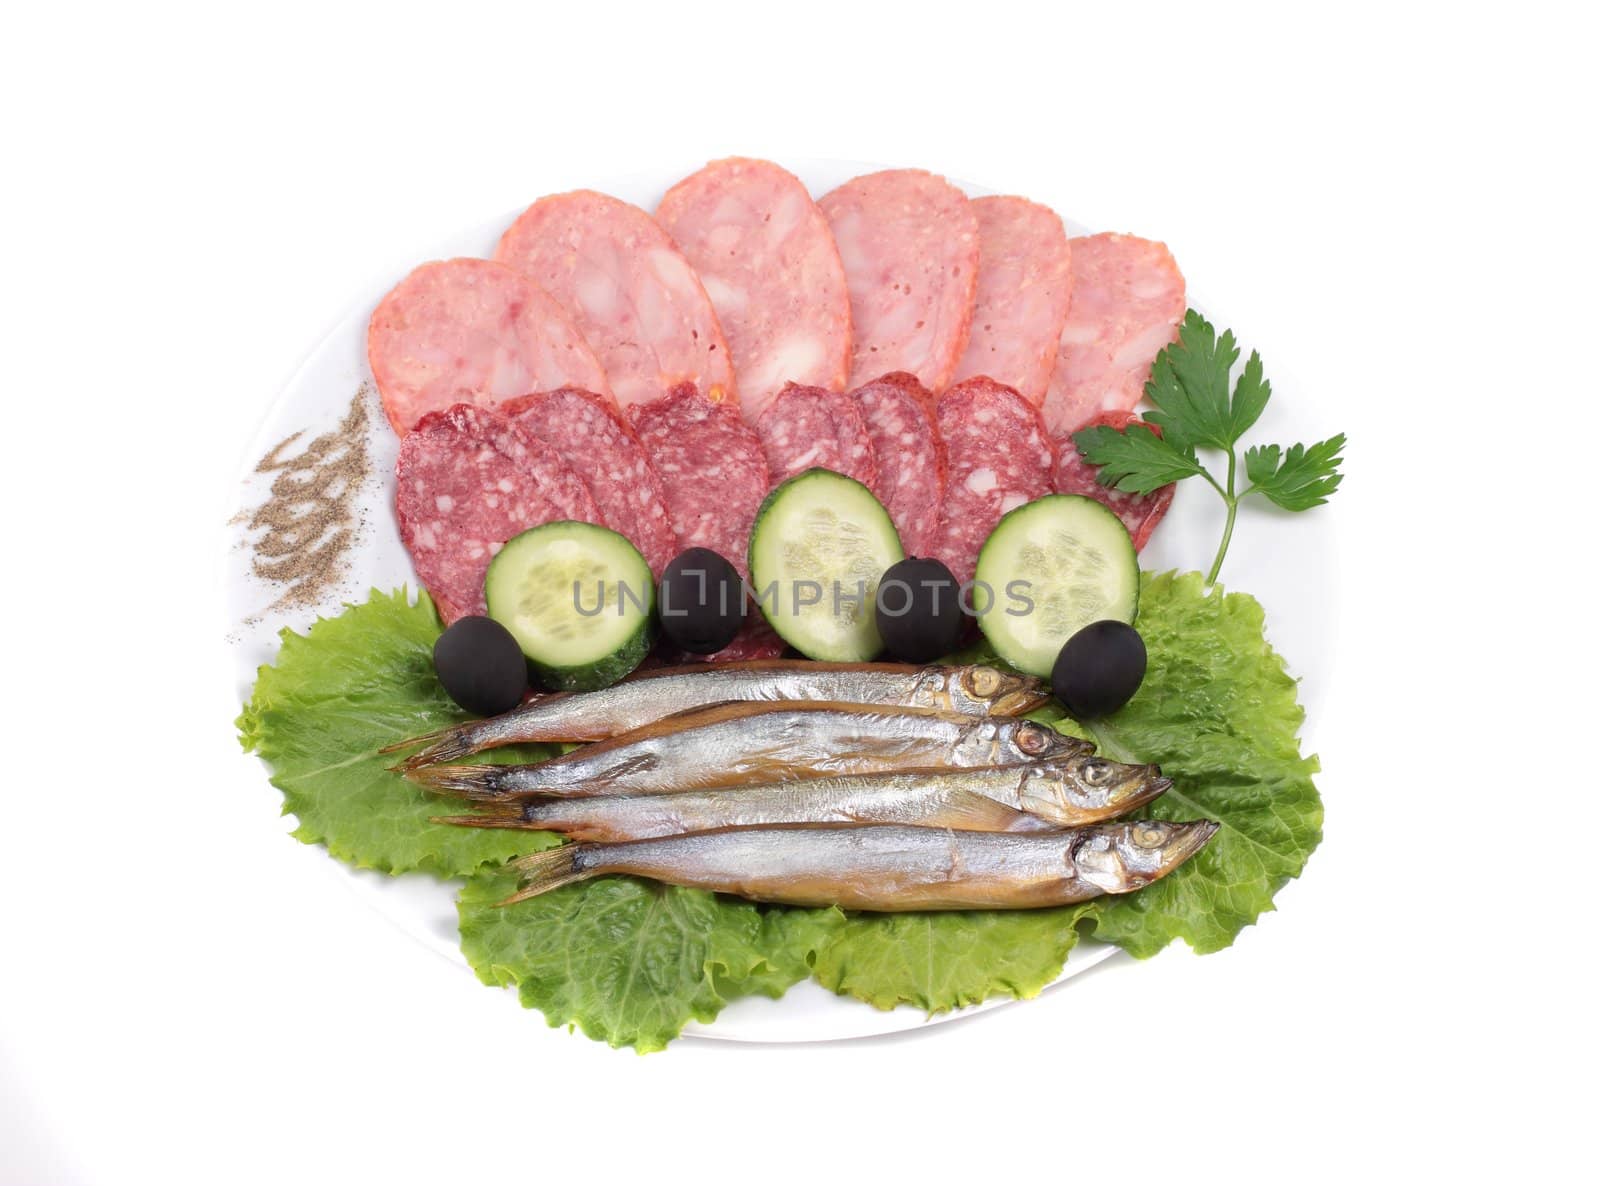 meat and fish on plate by shutswis